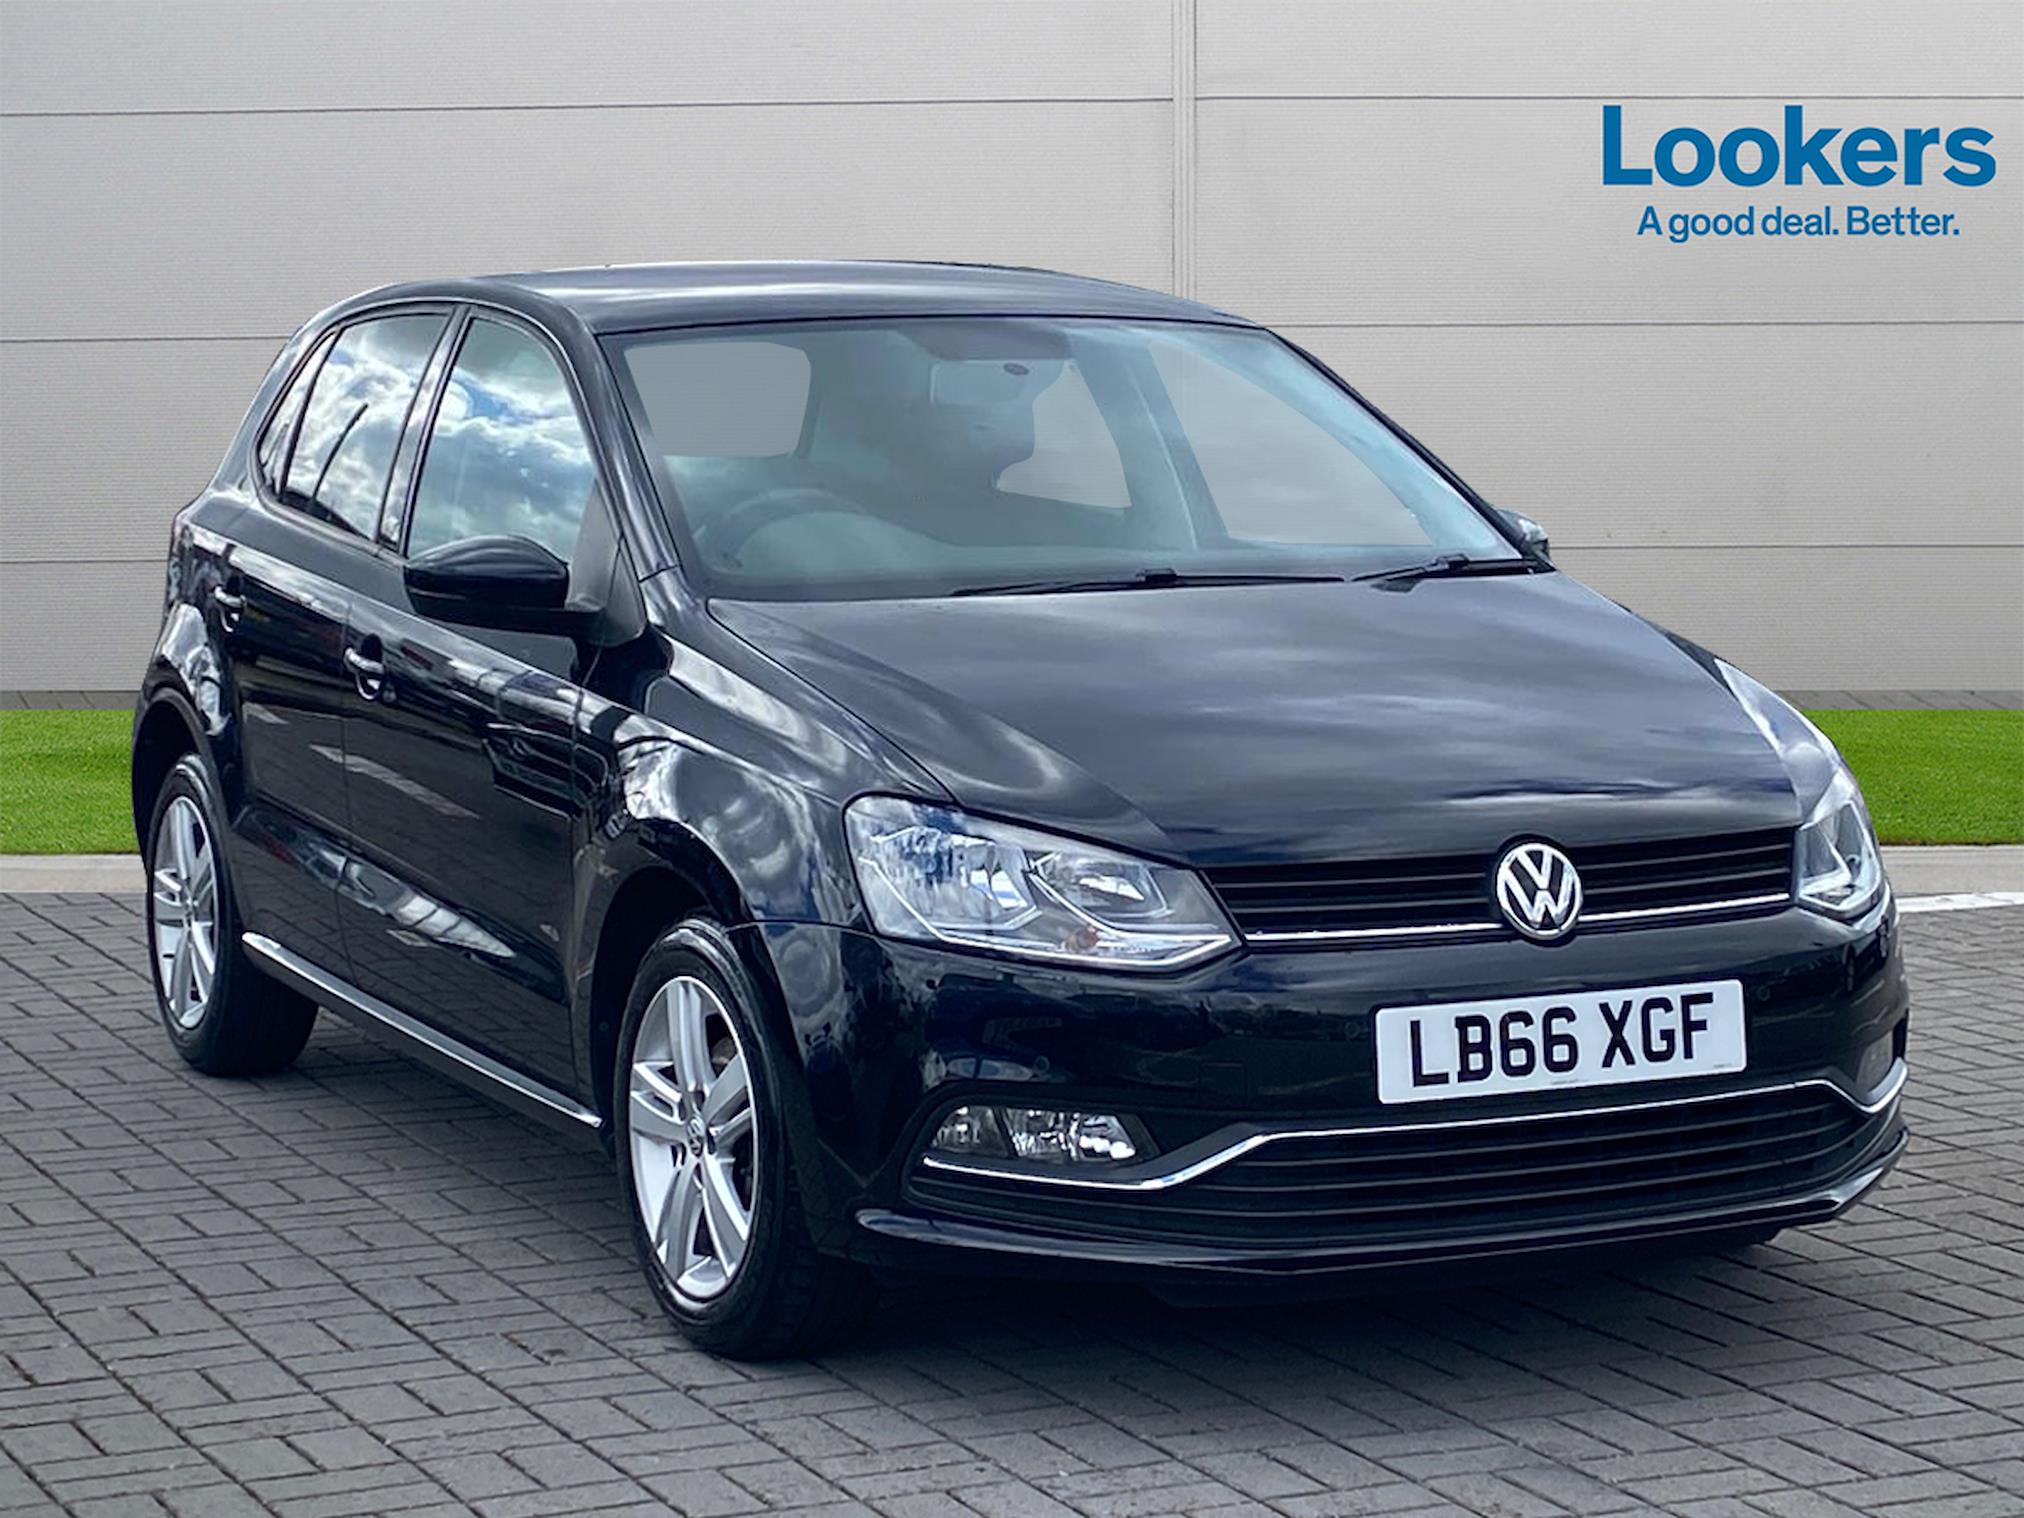 Used VOLKSWAGEN POLO 1.2 Tsi Match 5Dr 2017